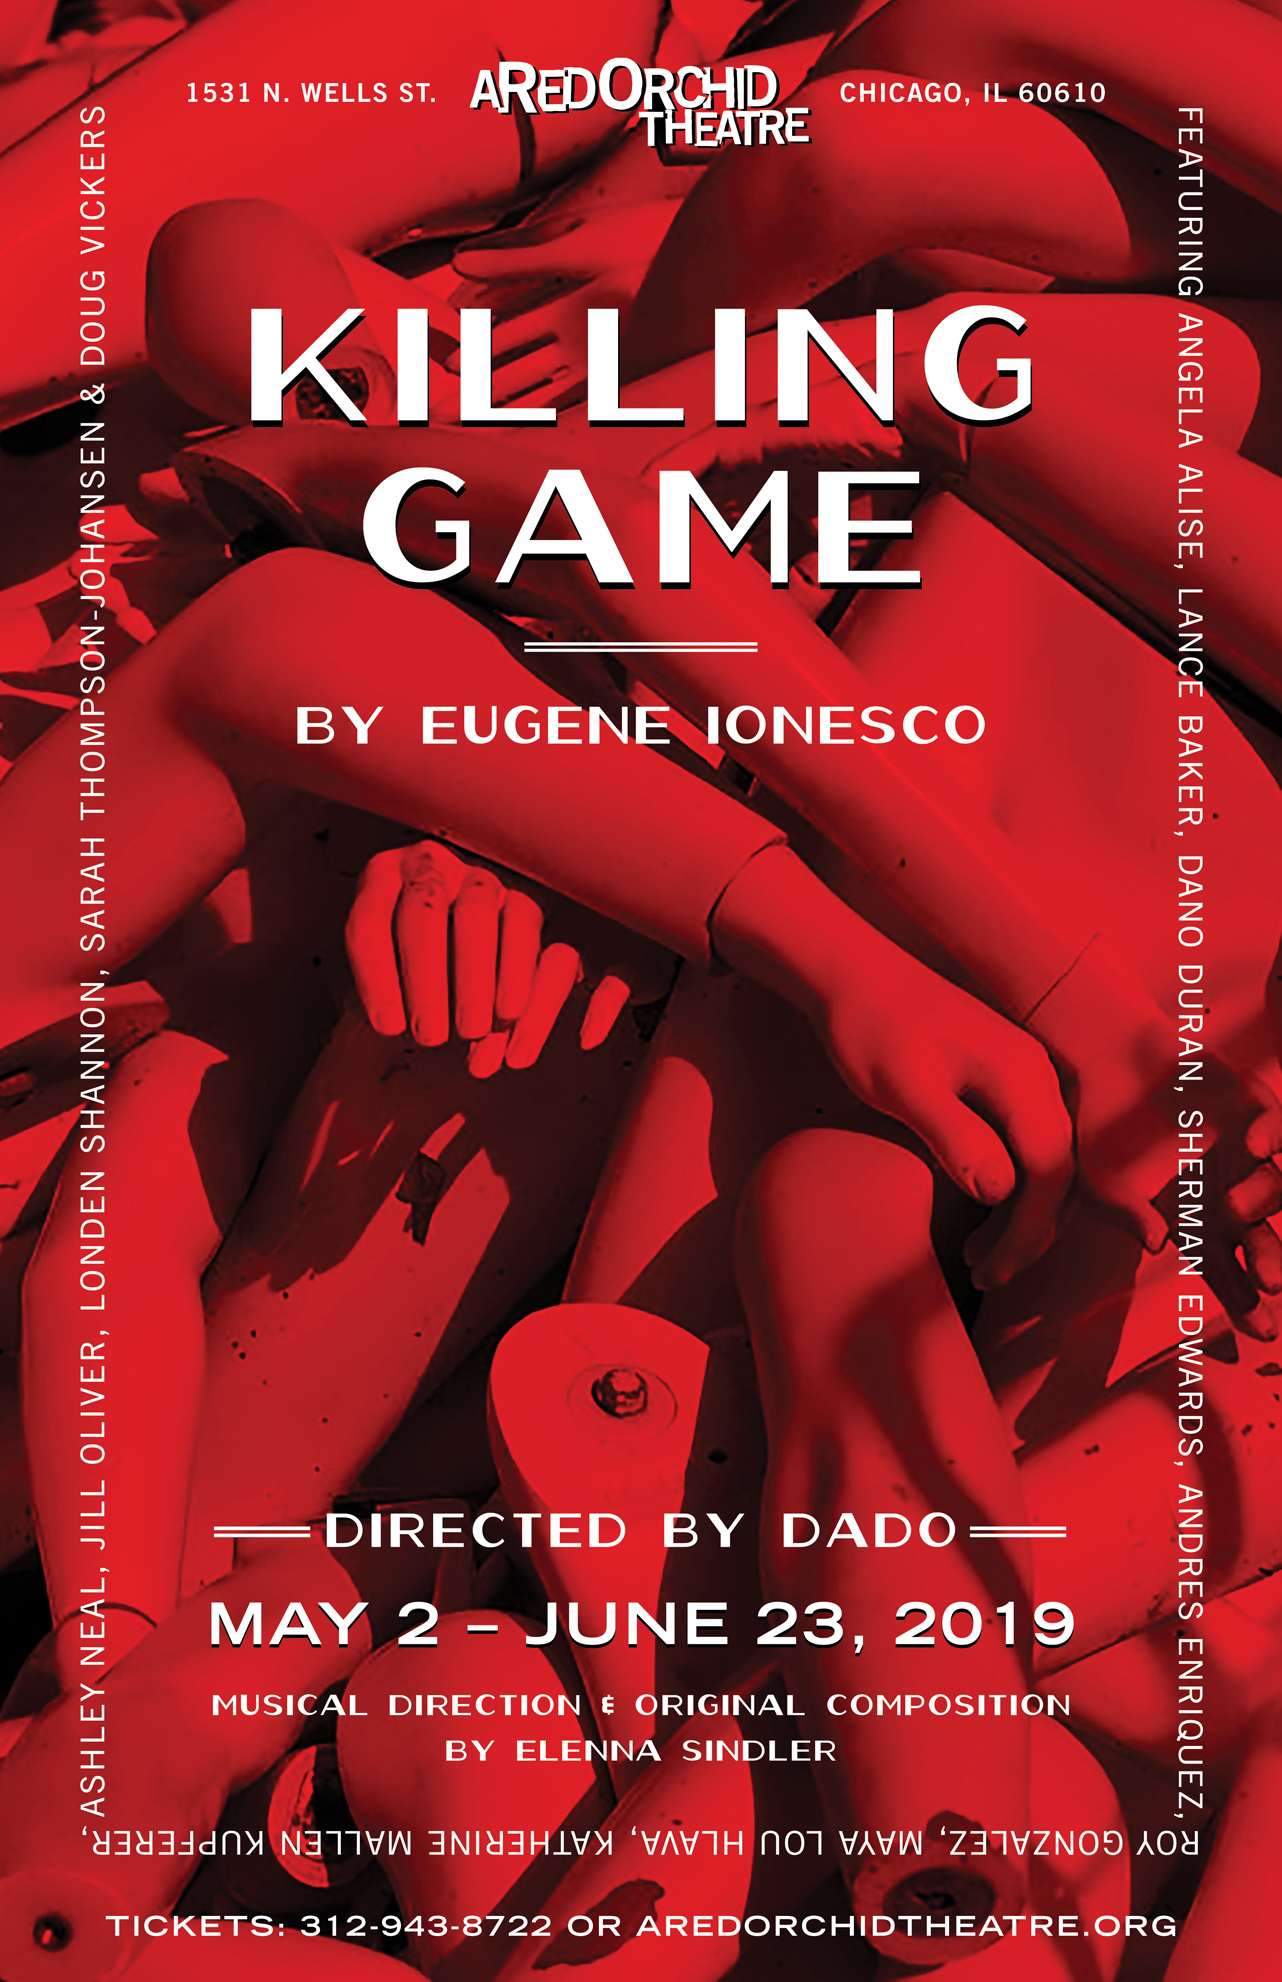 A town is beset by plague and the bodies are piling up along with moral accusations, political implications and medical speculations. We peer into households and down many streets as people search for any logic to the ceaseless barrage of death. One of Ionesco’s last plays, The Killing Game is a piercing and frighteningly funny look at how the function of language and the panic surrounding social crisis sends a community into a chaotic state of paranoia, hypocrisy and opportunism.